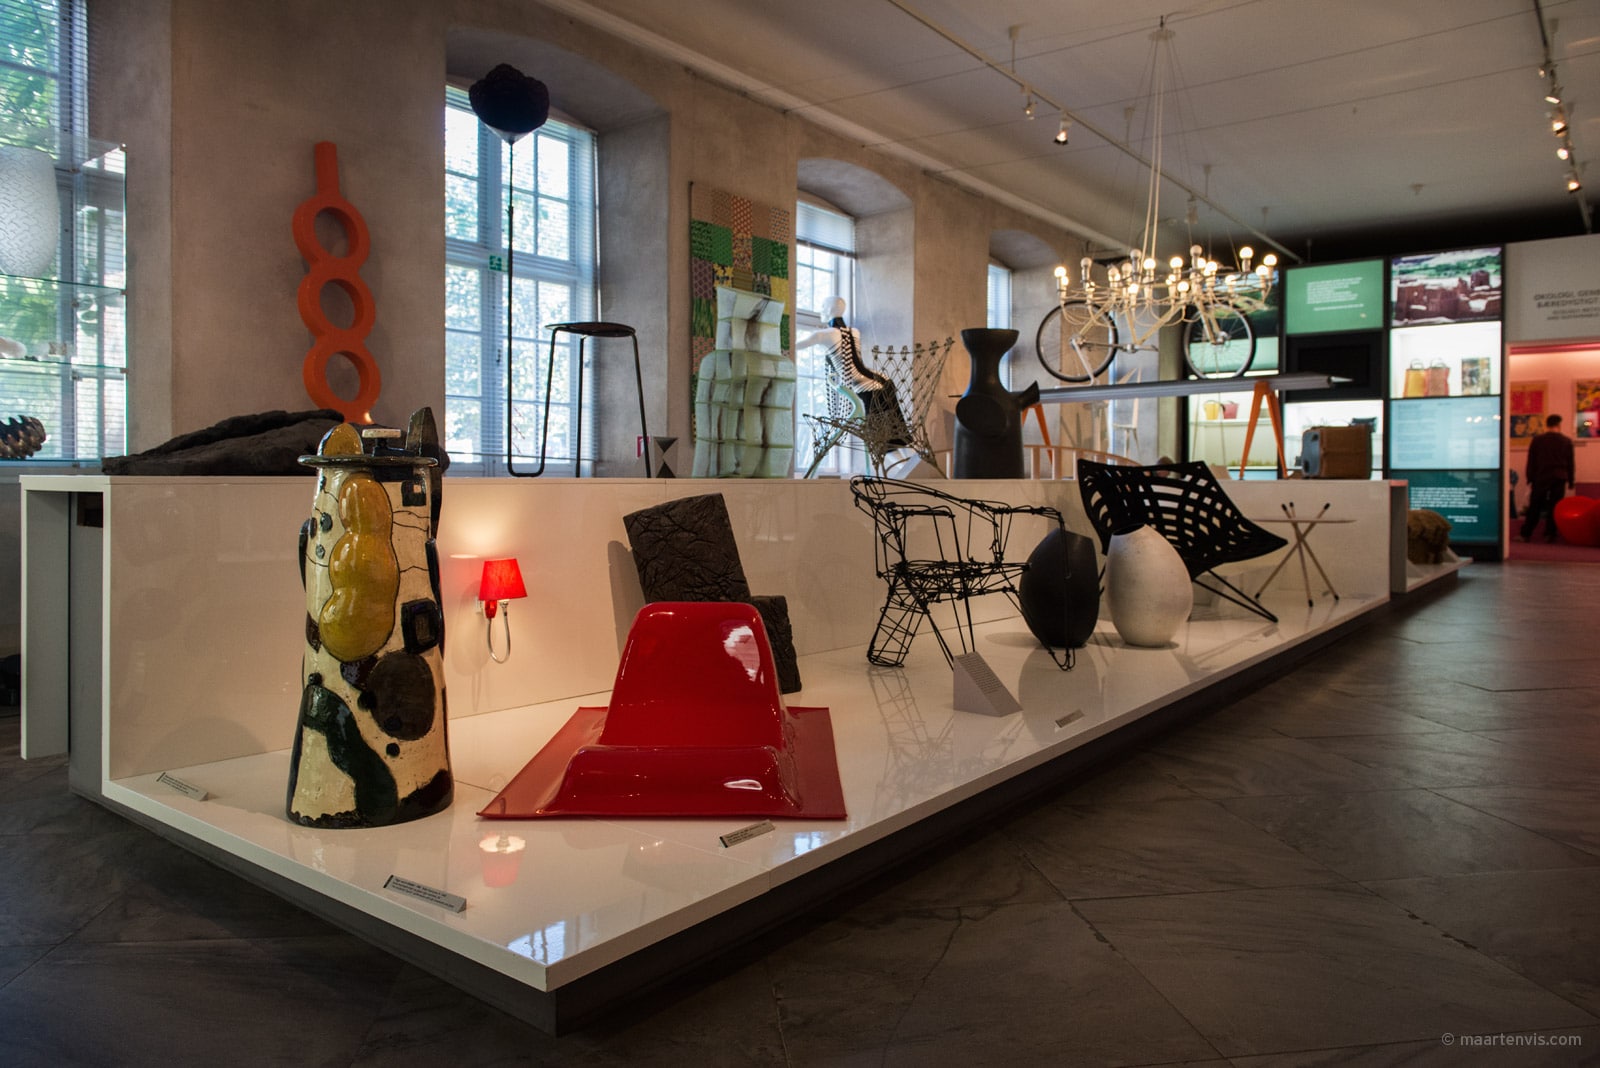 Copenhagen Long Weekend 7: The Design Museum - Fish and Feathers Travel ...